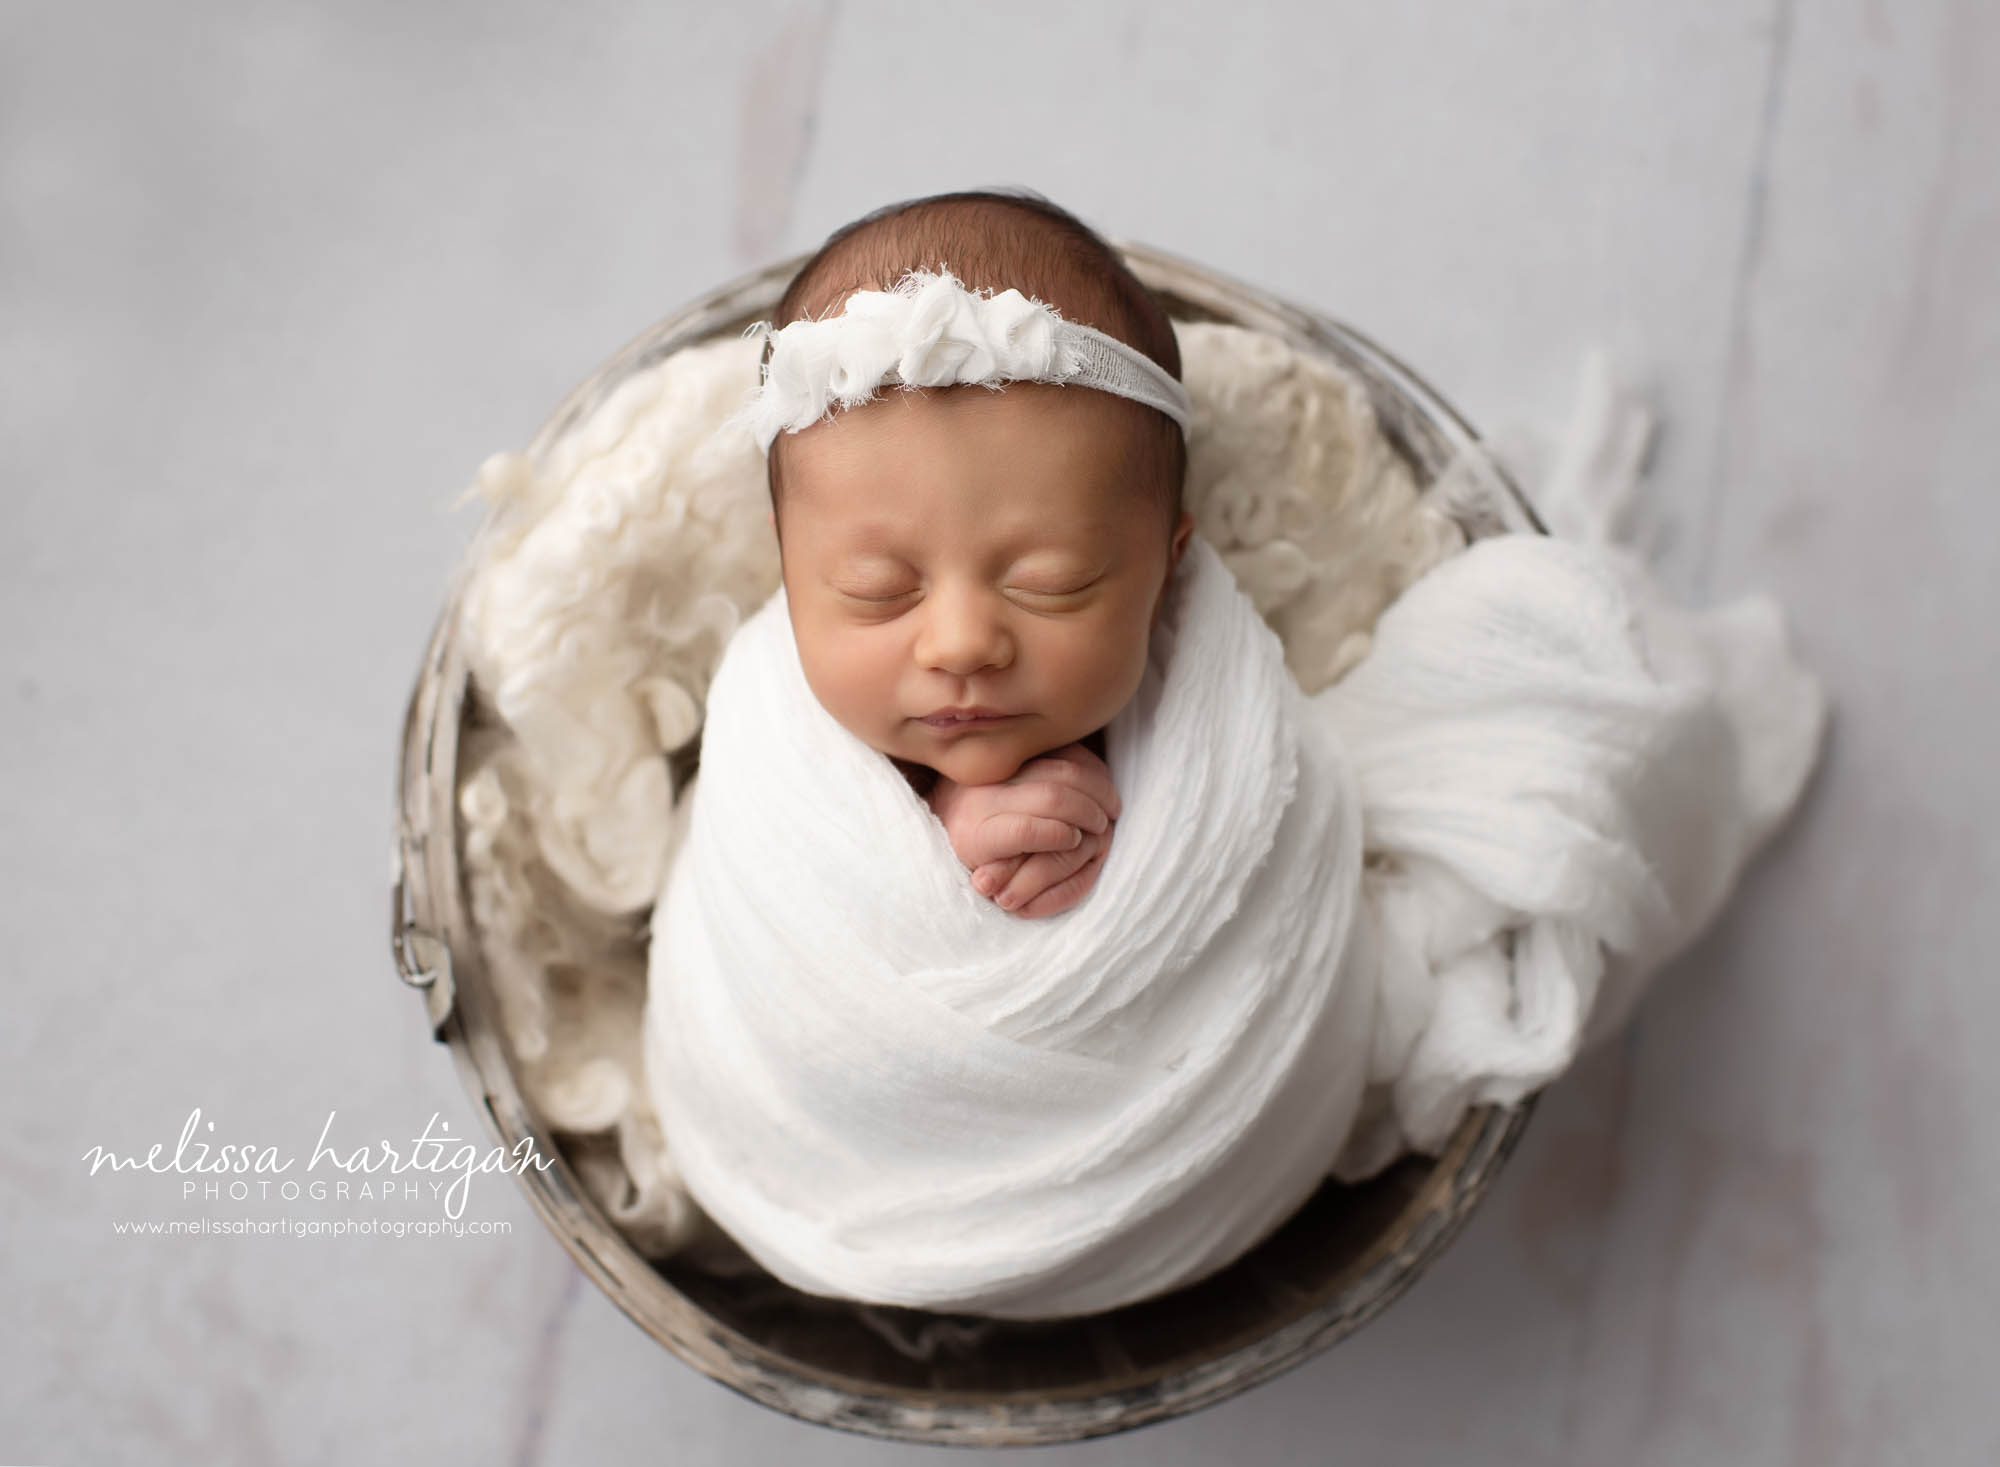 Newborn baby girl wrapped in white with white headband